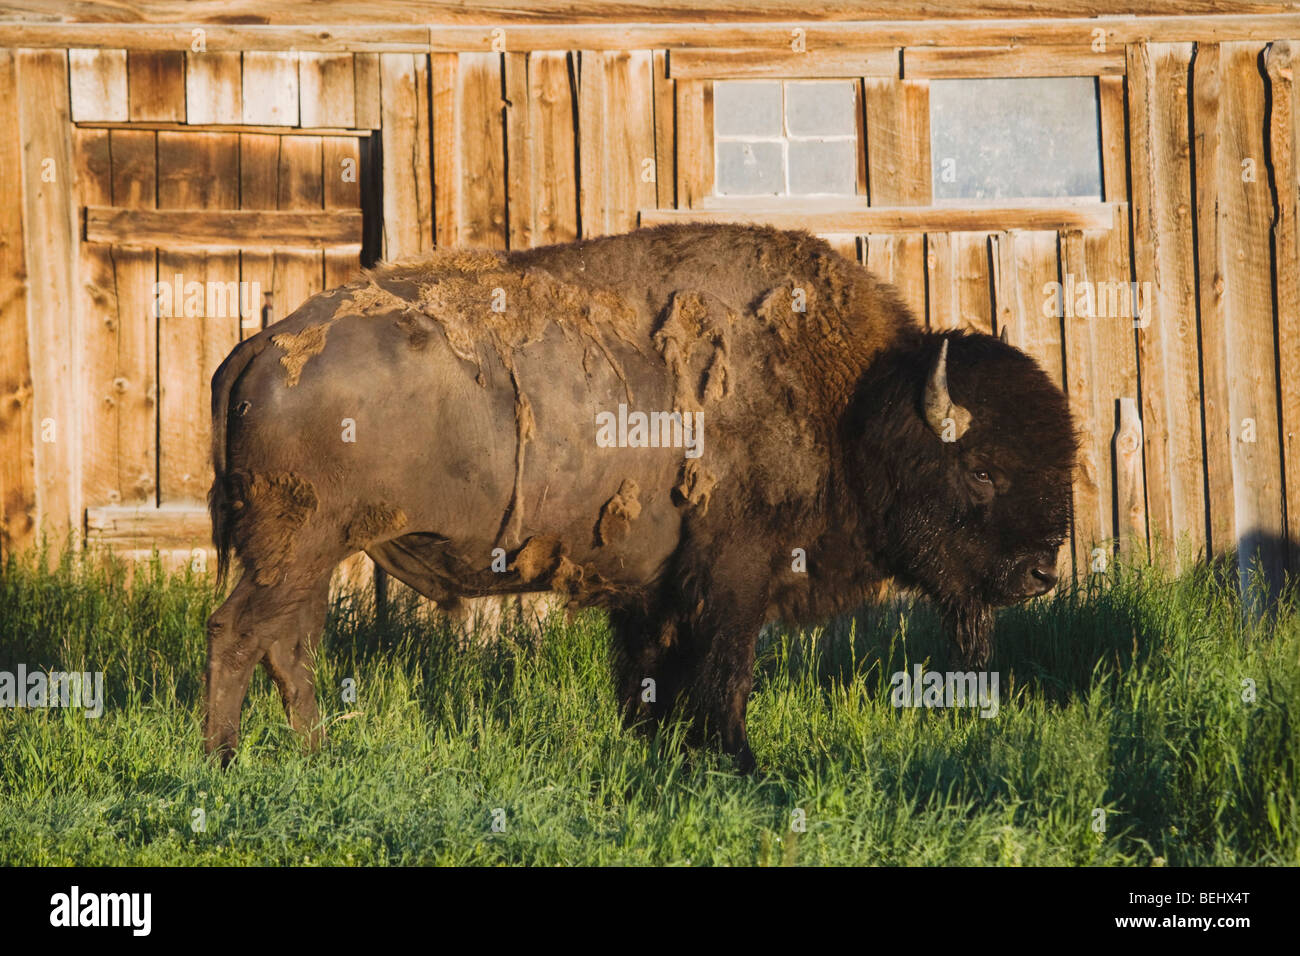 American Bison, Buffalo (Bison bison) adult in front of old wooden Barn, Antelope Flats, Grand Teton NP,Wyoming, USA Stock Photo